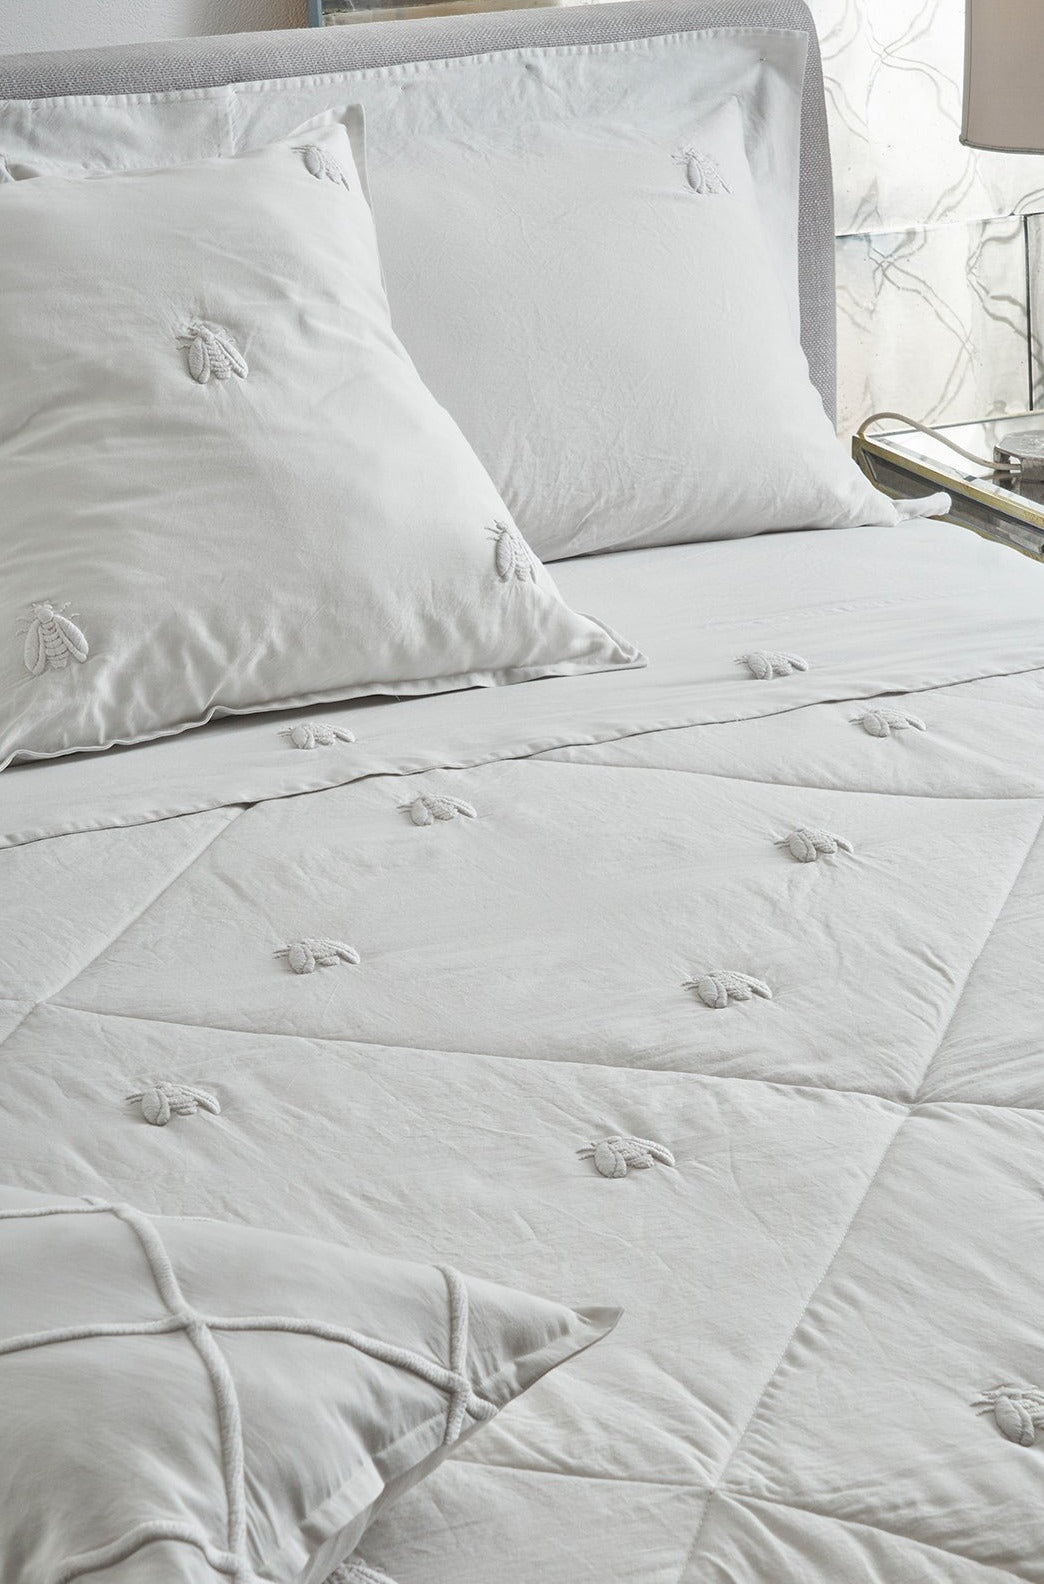 Quilted bedspread and quilt Api Abeille Merveille